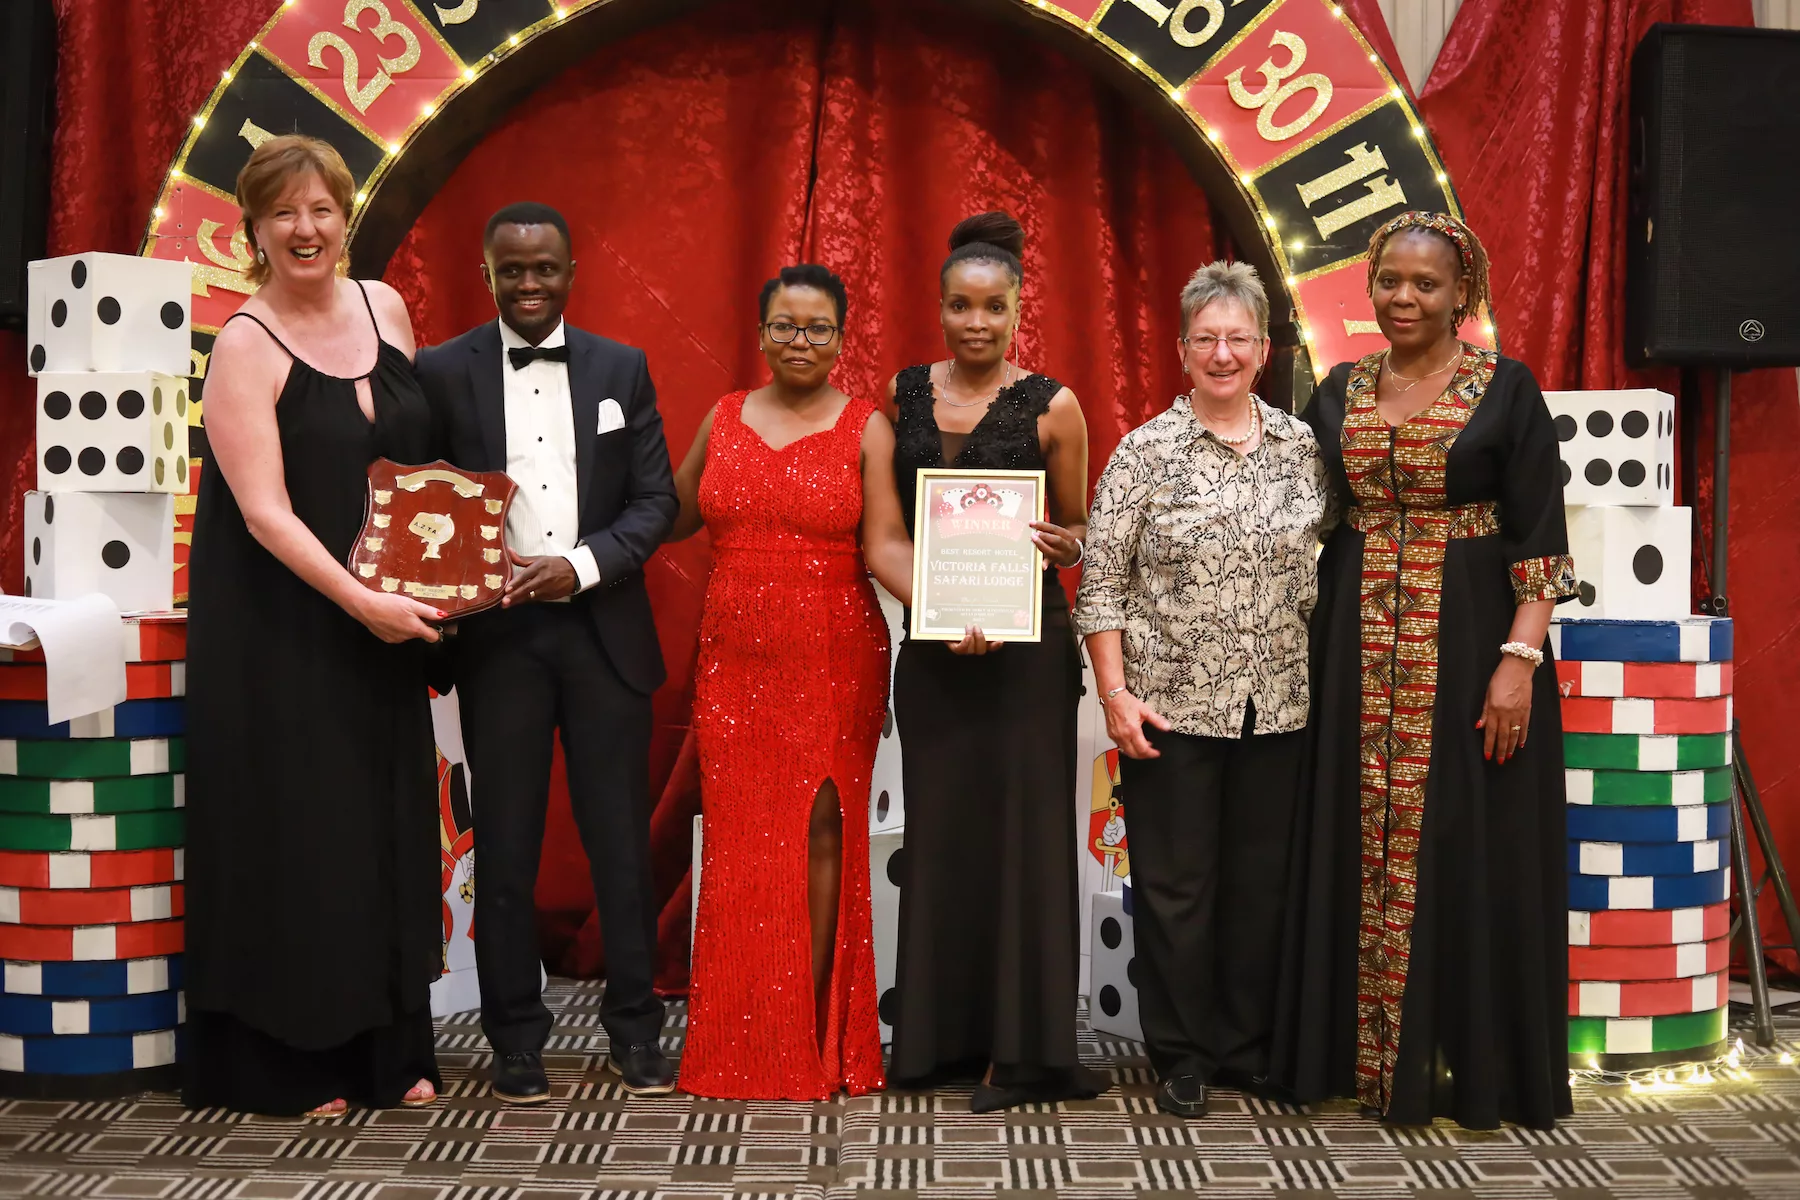 28th edition of Zimbabwe Travel Agents Awards held in Septembert